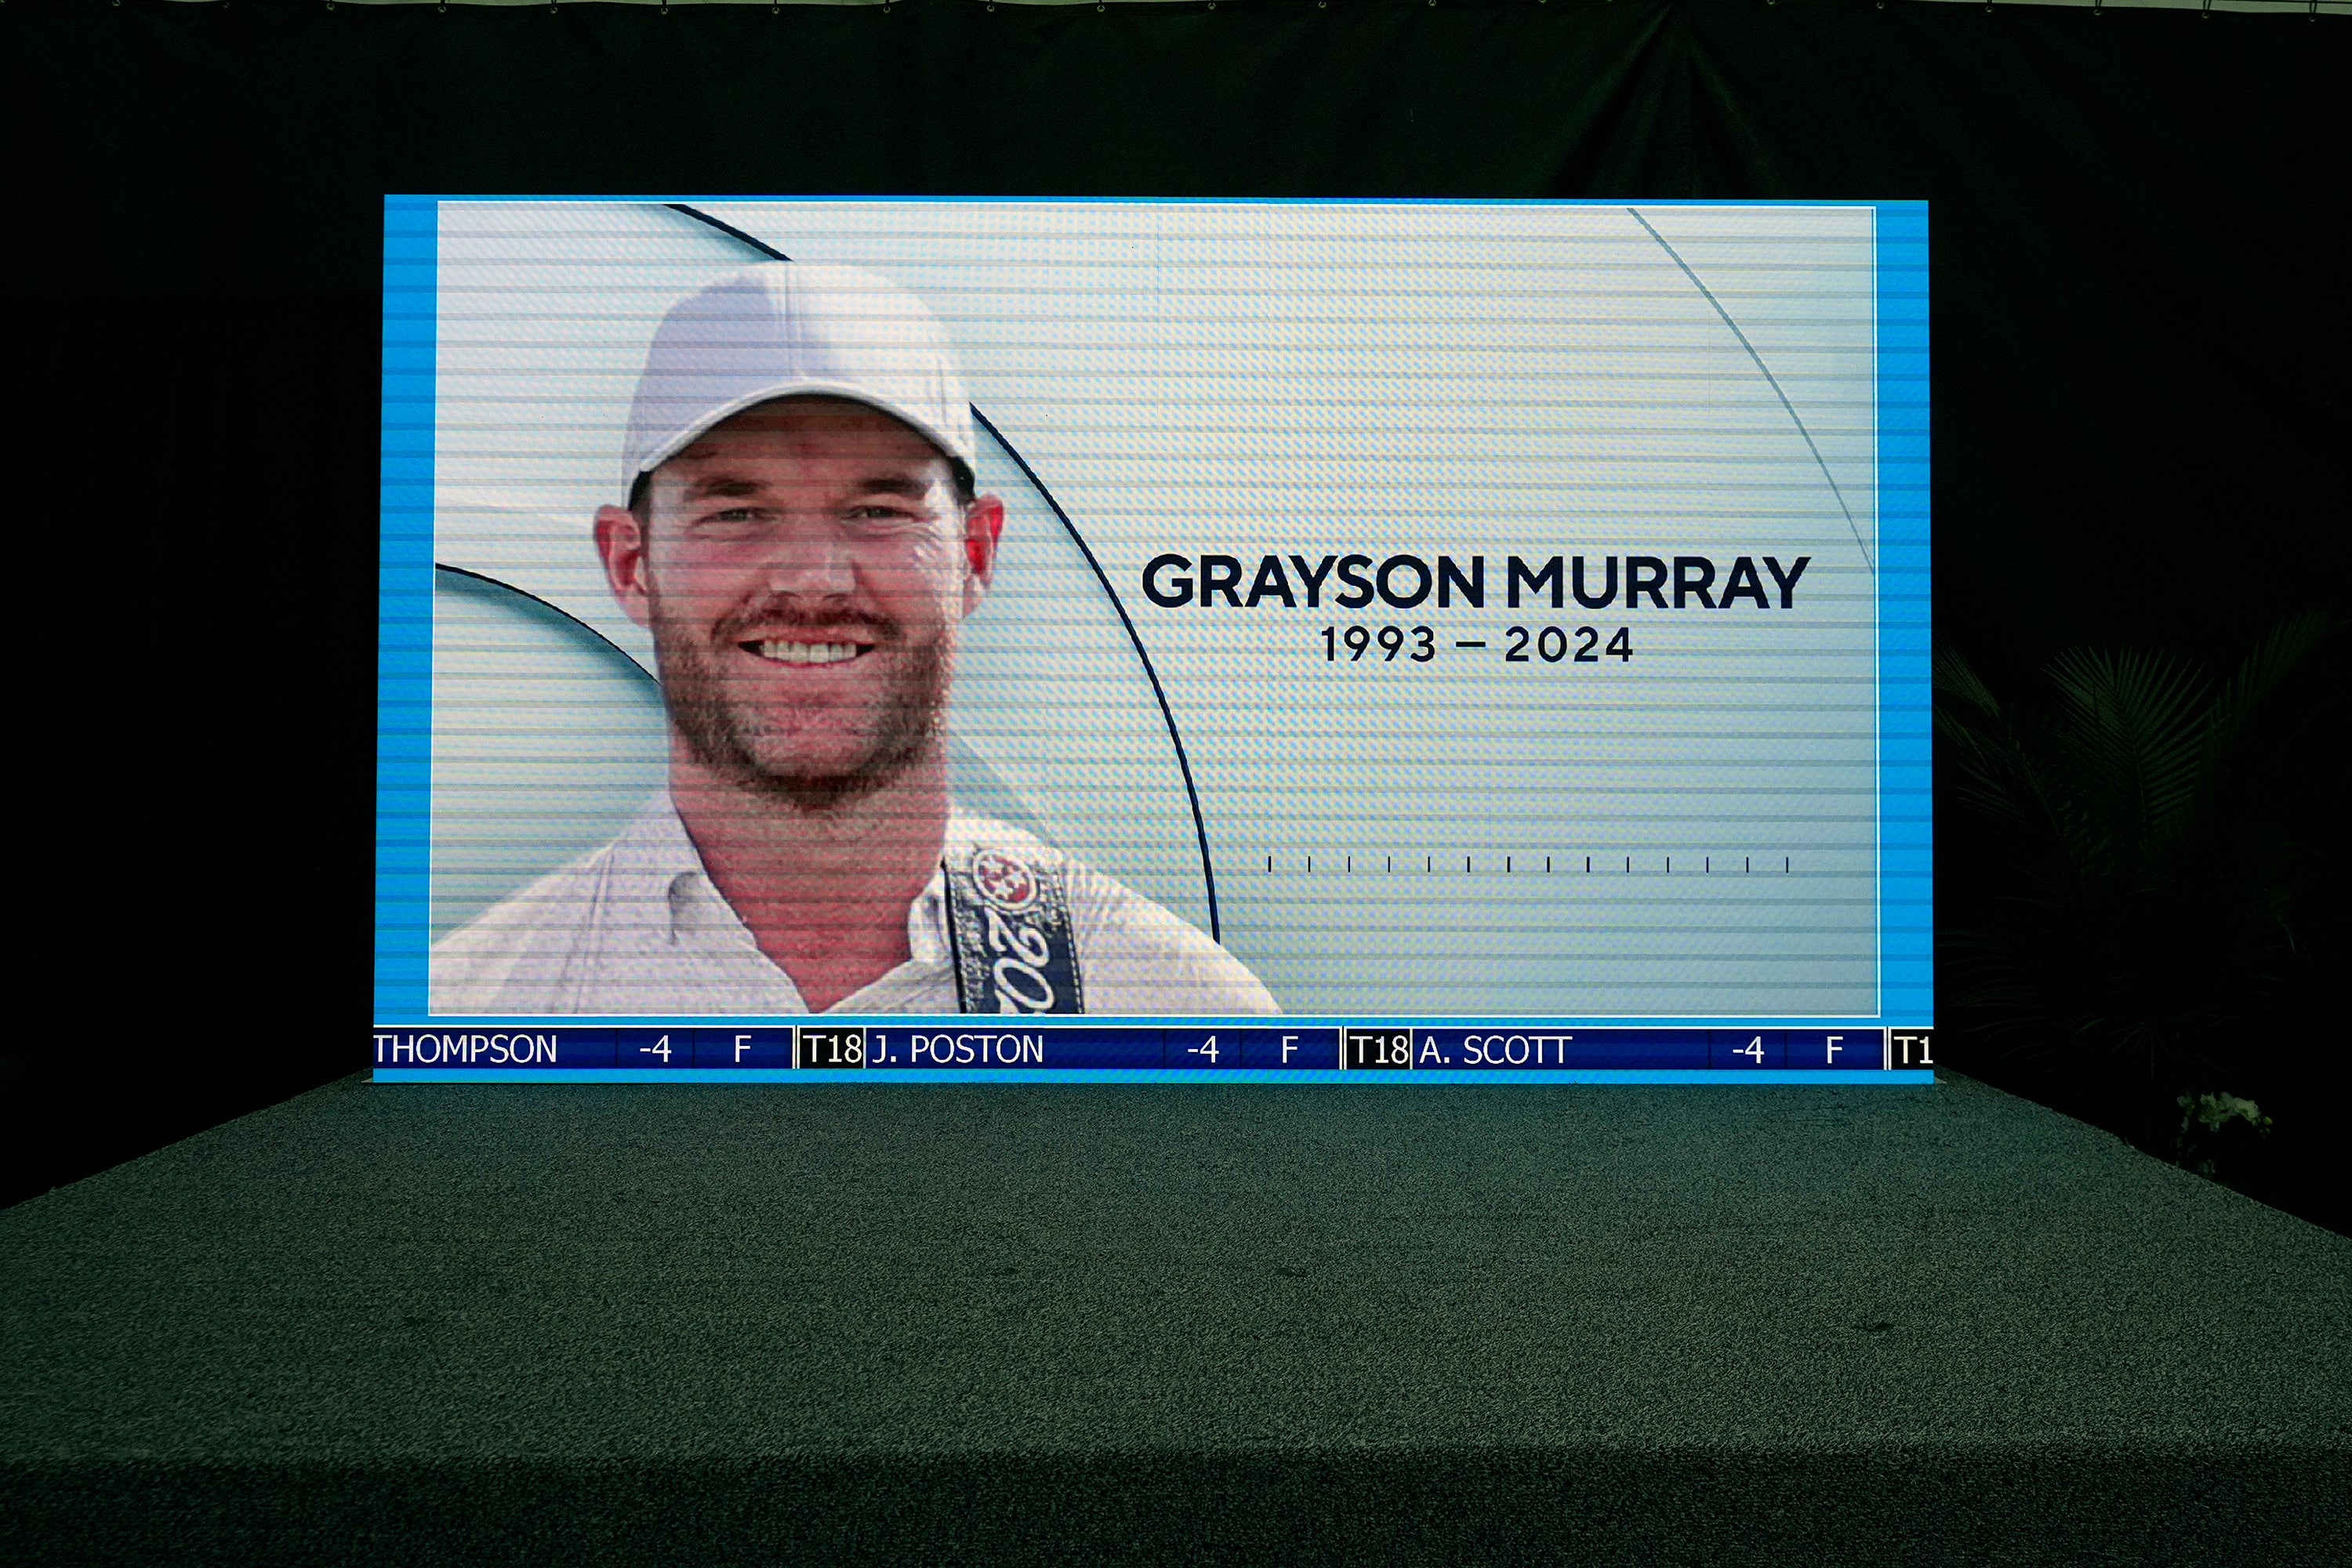 A golf broadcast by CBS is played on an empty stage at the media center showing a photo of Grayson Murray